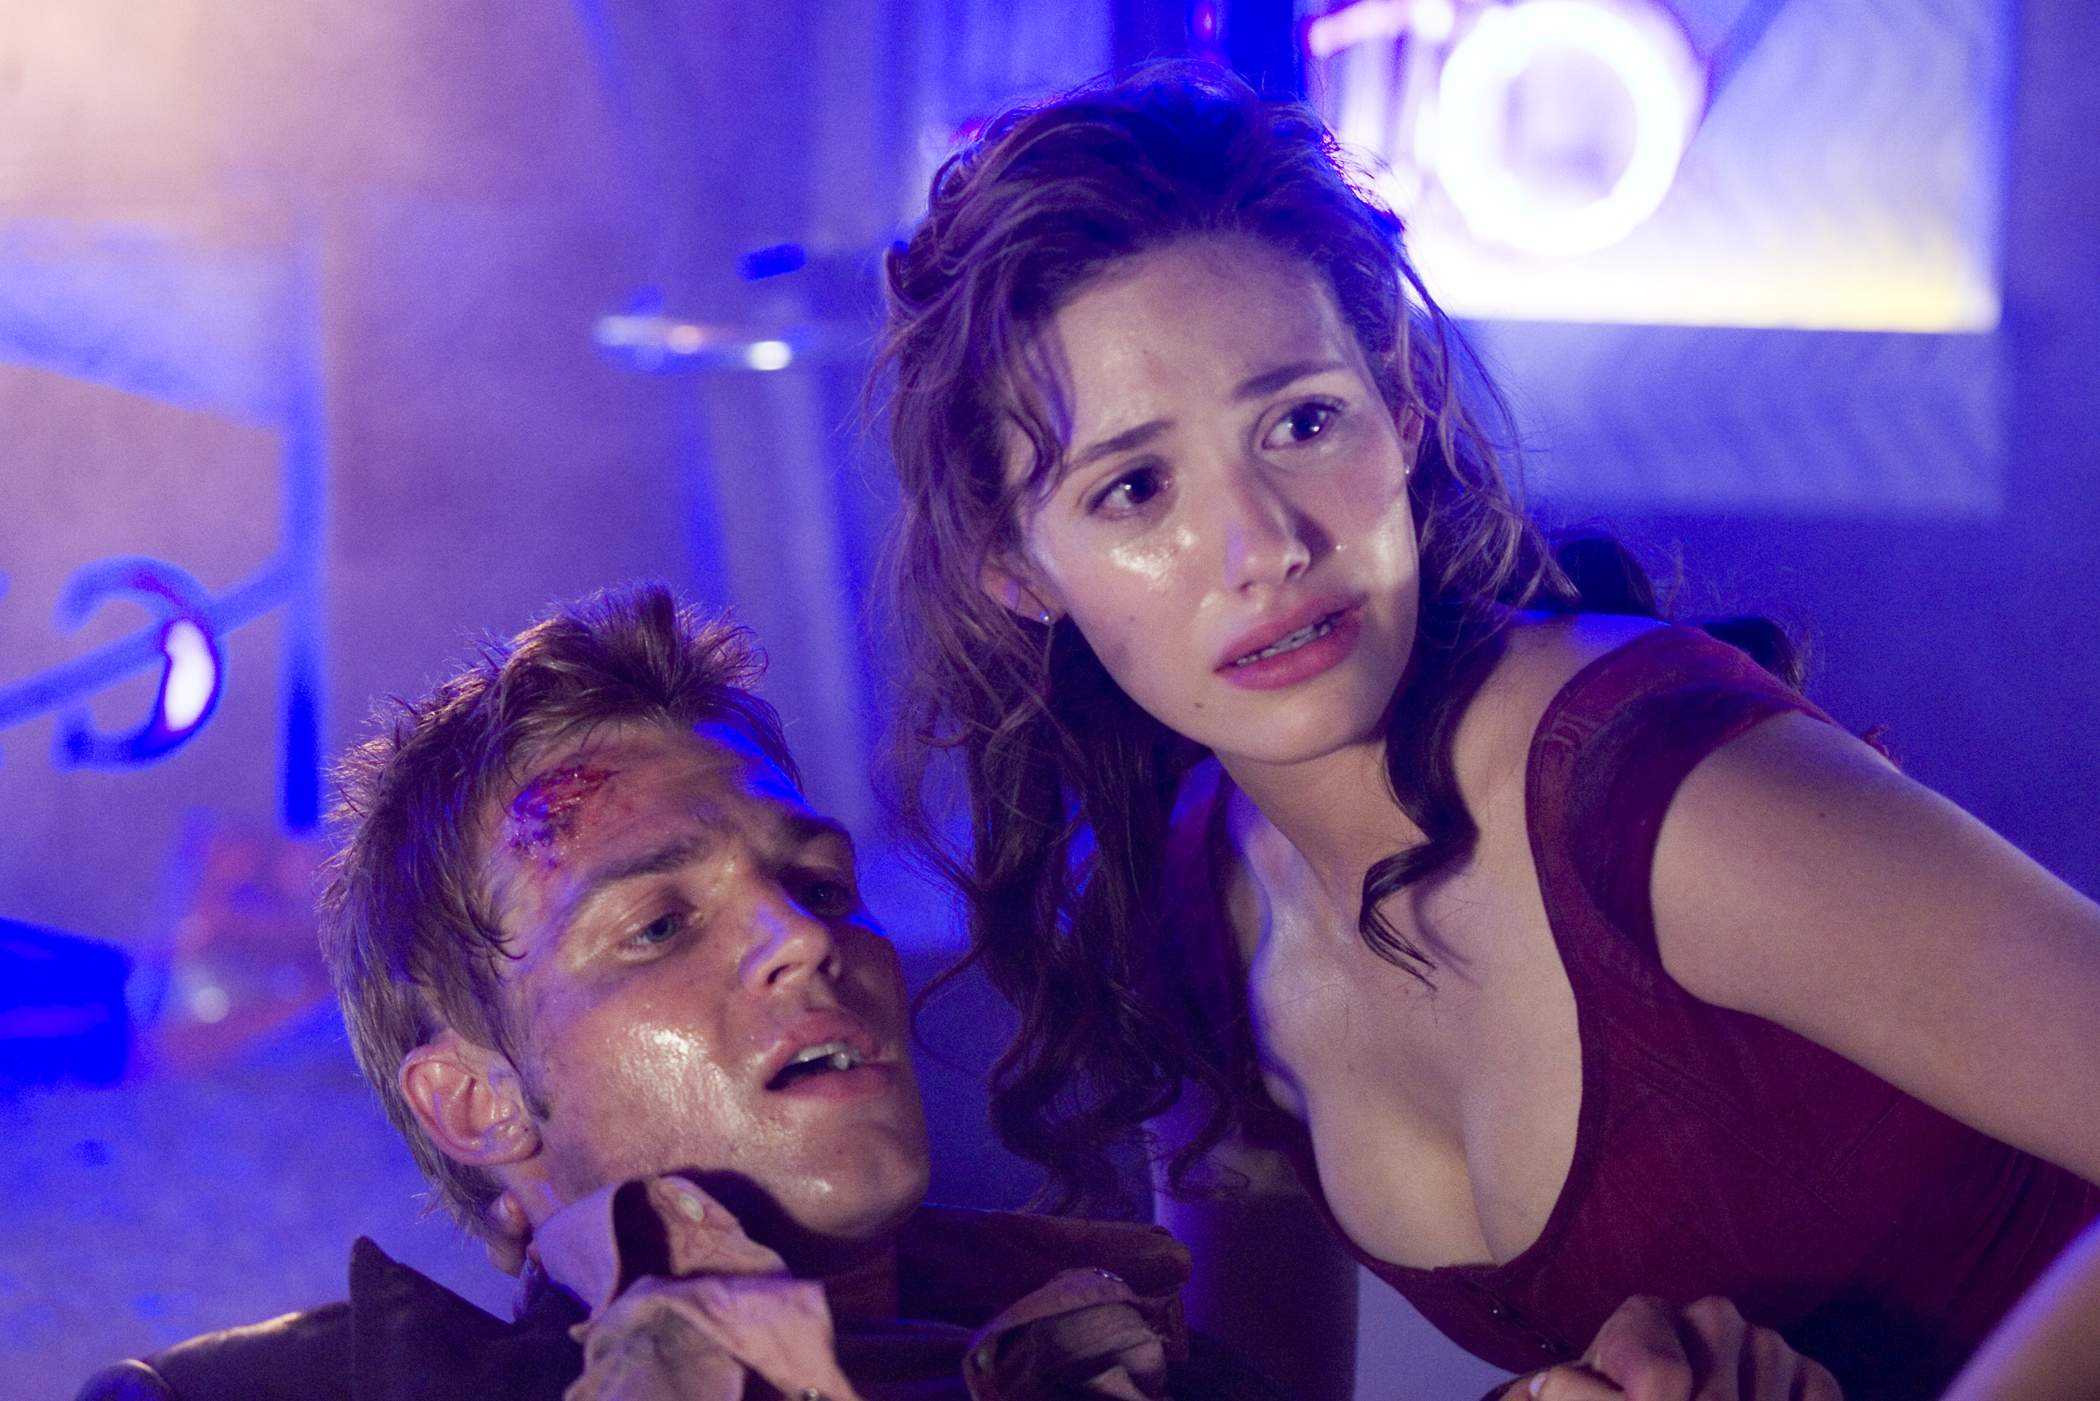 MIKE VOGEL as Christian and EMMY ROSSUM as Jennifer Ramsey in Warner Bros Pictures' Poseidon (2006)